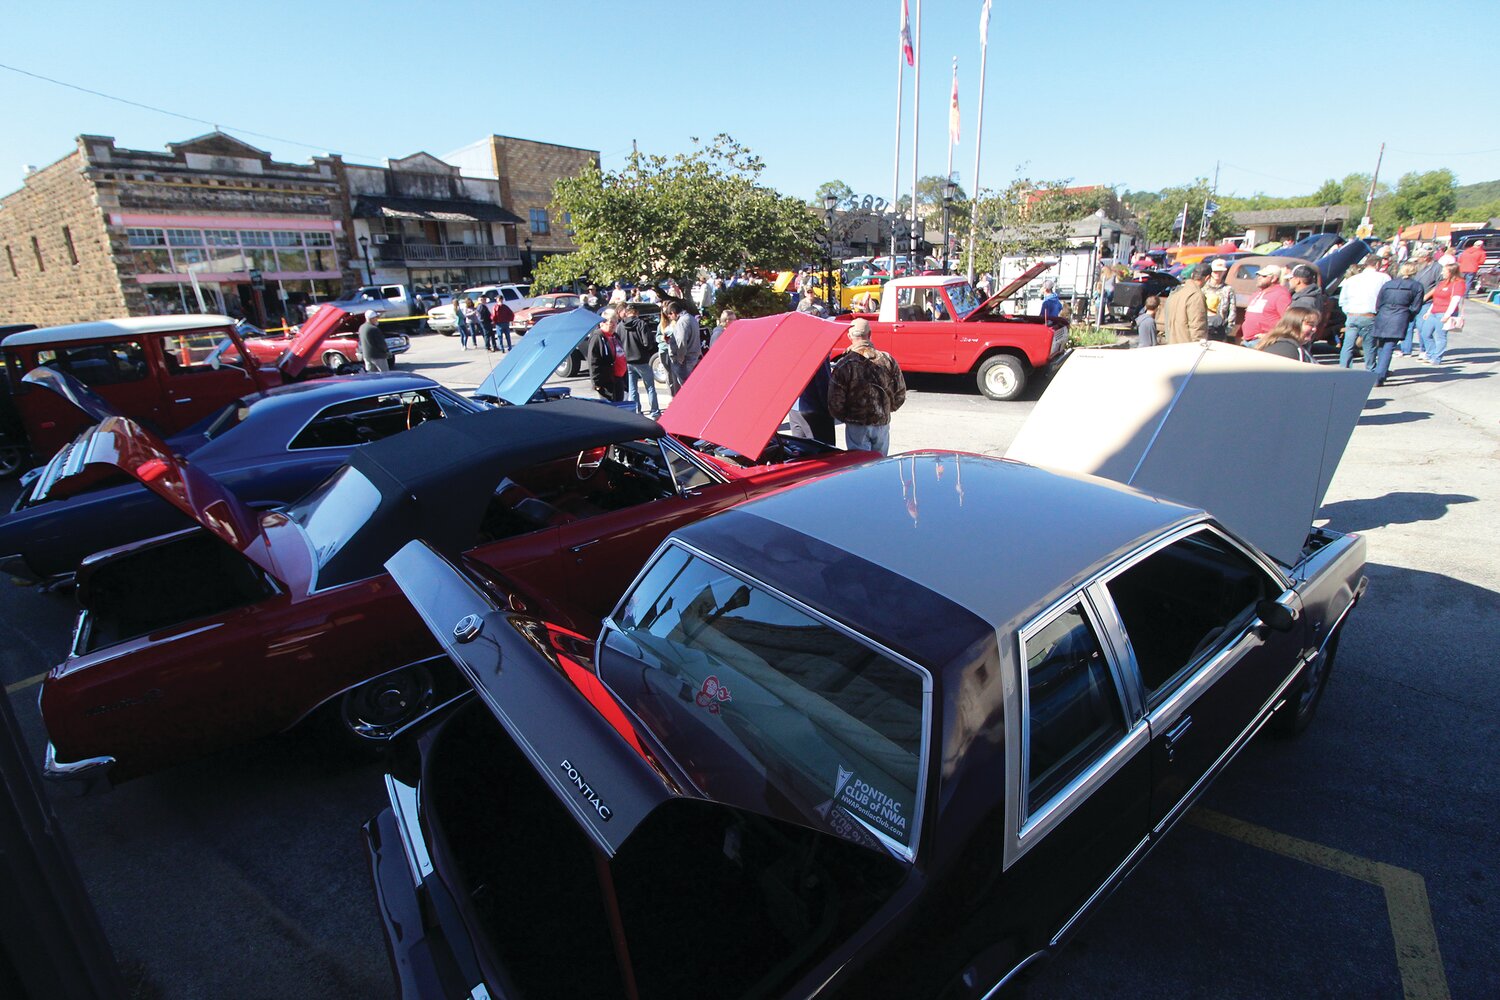 Jason Yates, organizer of the 16th Annual Cruz’n the Square car show held on Oct. 7, declared the show a success. “We had a great event,” he said. “We had 92 cars judged and 112 cars in total.” Cars that were late entries or part of the Classic Chrome Club, of which Yates is presi- dent, were not judged. “We had lots of spectators and lots of fun. Our club would like to thank all our spon- sors and volunteers. Without them, this event would not be a success.

“Special thank you to Donovan Villines and family for cooking pulled pork and smoked chicken,” Yates said. “We would also like to thank Jay Moffett and his Today’s Bank crew for cooking burg- ers and hot dogs. They have both helped for many years and we really appreciate them.”

Yates said sponsorships and late donations are still coming in, “so we don’t have an official total yet, but it looks like we have done well again this year.”

Award winners in this year’s show are:

Best of Show, Mike John- ston, 1932 Ford Roadster;

People’s Choice, Jason Willcutt, 2015 Dodge Chal- lenger;

First place Classic Car, Rick Walden, 1931 Ford A Coupe; second place Classic Car, Duard Maybee, 1972 Chevy Chevelle SS; third place Classic Car, Gerry and Cindy Zanger, 1971 1/2 Pontiac GT-37;

First place Rat Rods, Paul Sullins, 1949 GMC pickup; second place Rat Rods, Tim Sizemore, 1949 Ford F-1; third place Rat Rods, Dwight Ennis, 1928 Ford Roadster;

First place Modern Muscle, Jason Willcutt, 2015 Dodge Challenger; second place Modern Muscle, Pete Ices, 2023 Dodge Hellcat; third place Modern Muscle, Christian Butcher, 2017 Dodge Hellcat; first place 4X4, Randy Wells, 1976 Toyota FJ-40; second place 4X4, Dwight McCoy, 1983 Chevy pickup; third place 4X4, Bob Bolinger, 1959 Chevy pickup;
First place semi, Jerry Whittmore, Peterbilt 379X.